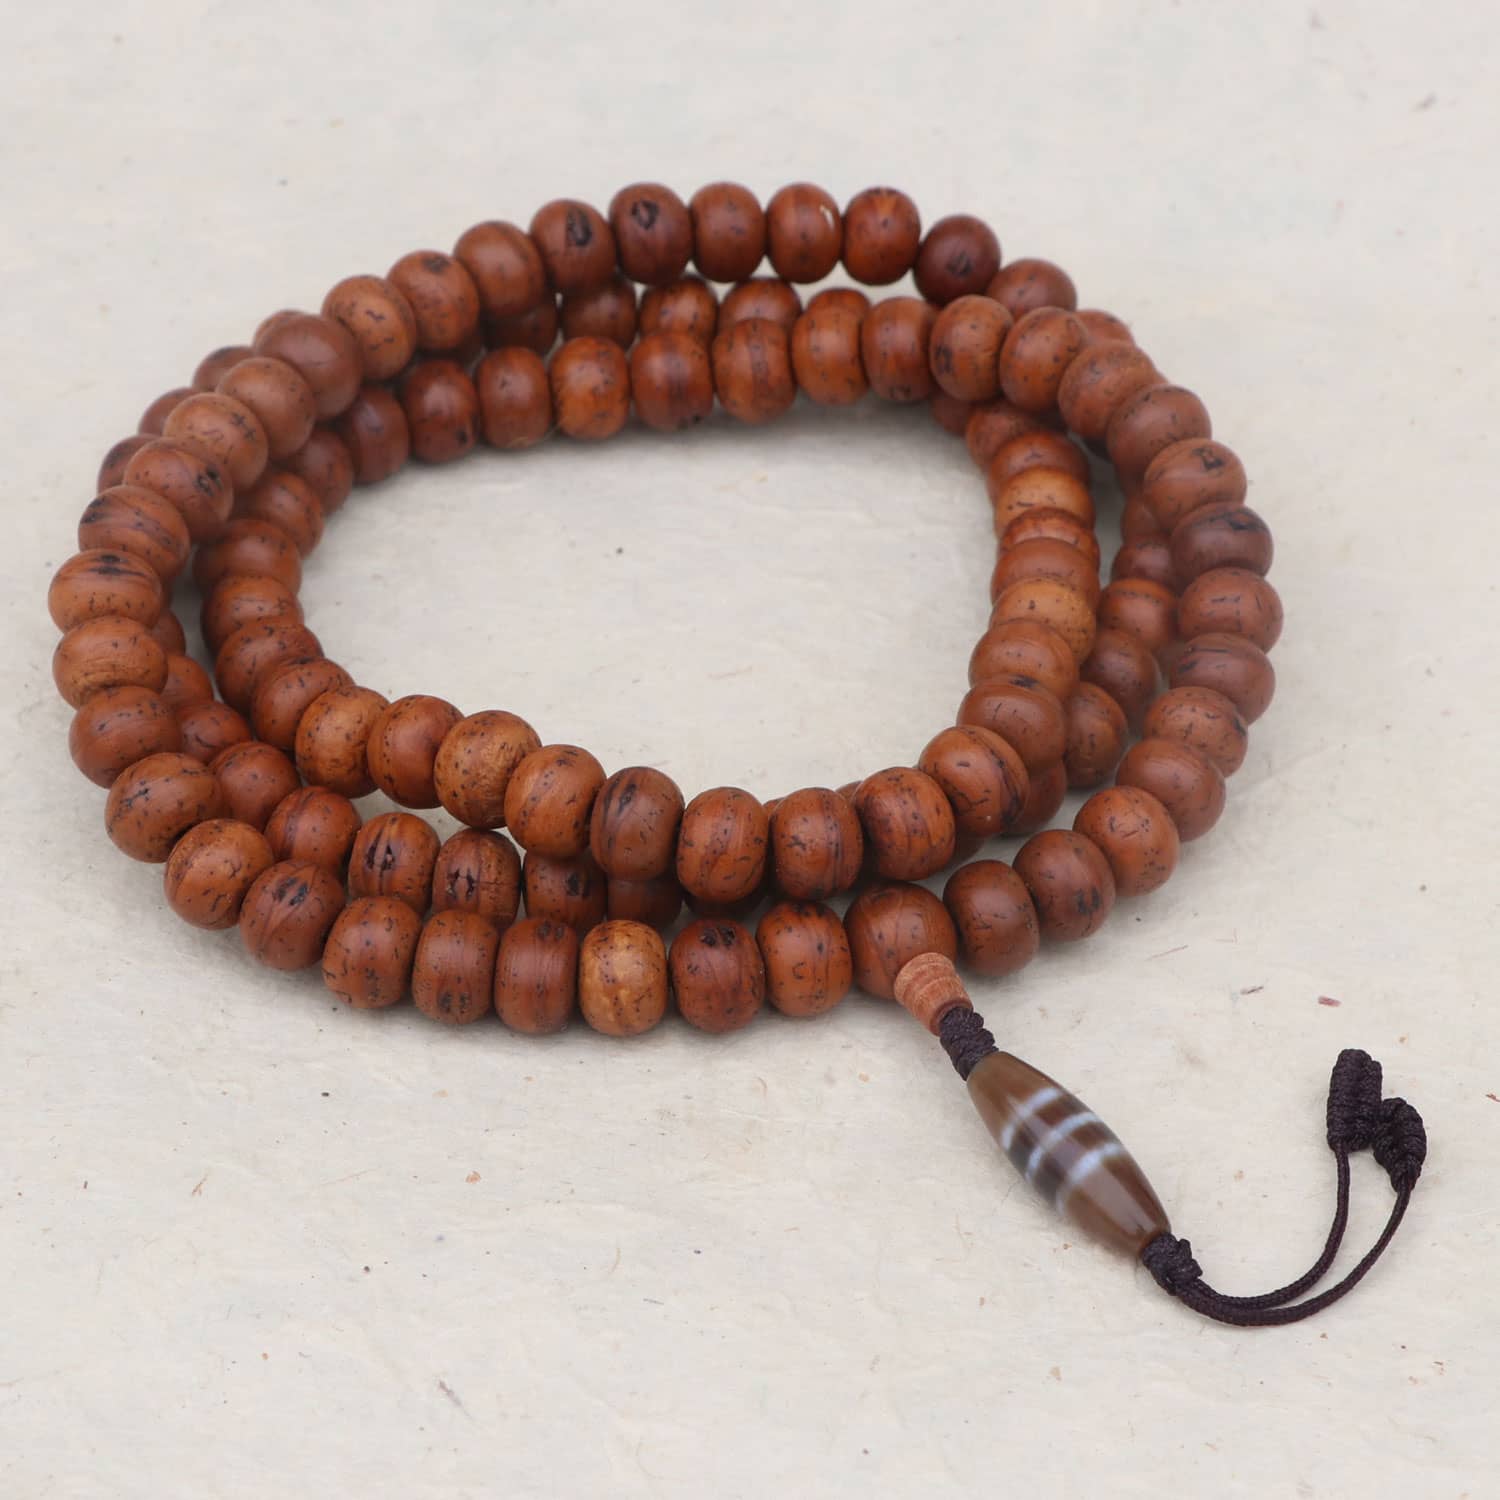 Bodhi Seed Mala Meaning: Benefits and Uses